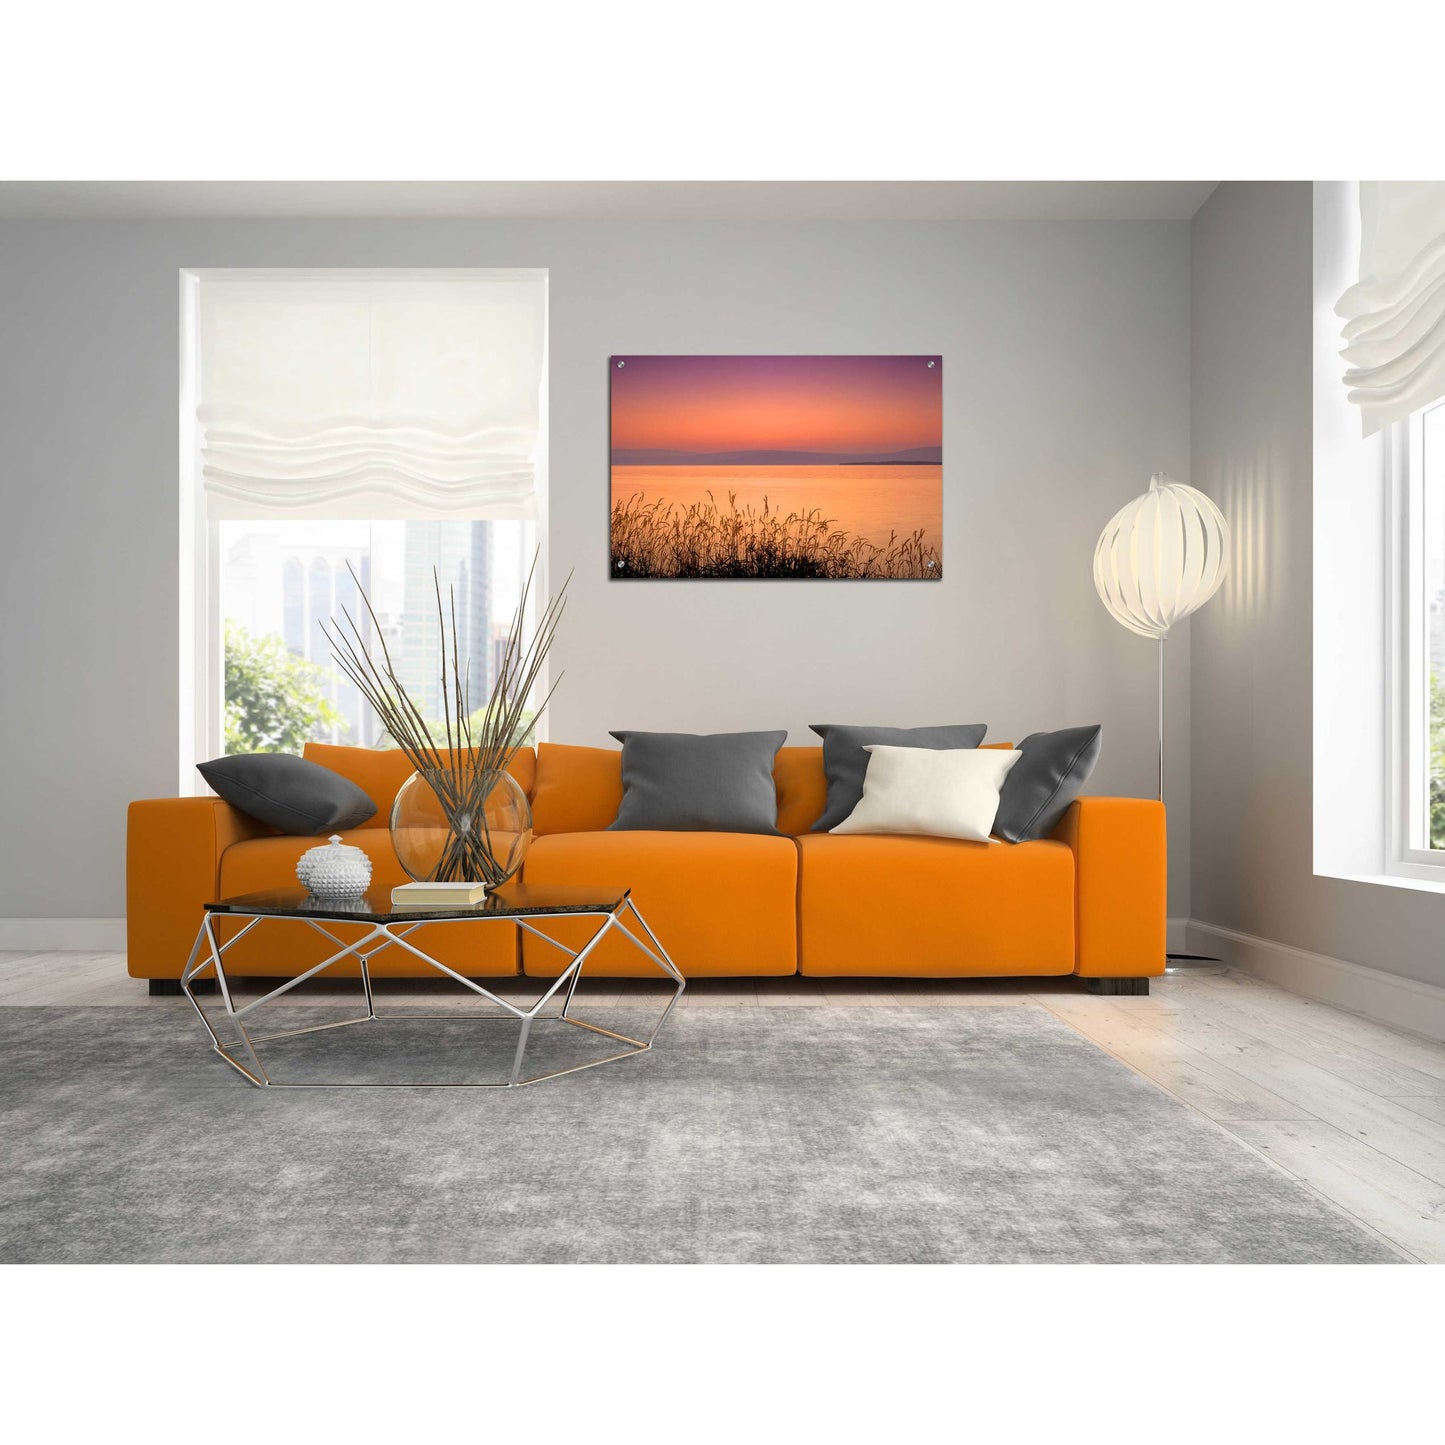 Epic Art 'Golden Hour' by Dennis Frates, Acrylic Glass Wall Art,36x24